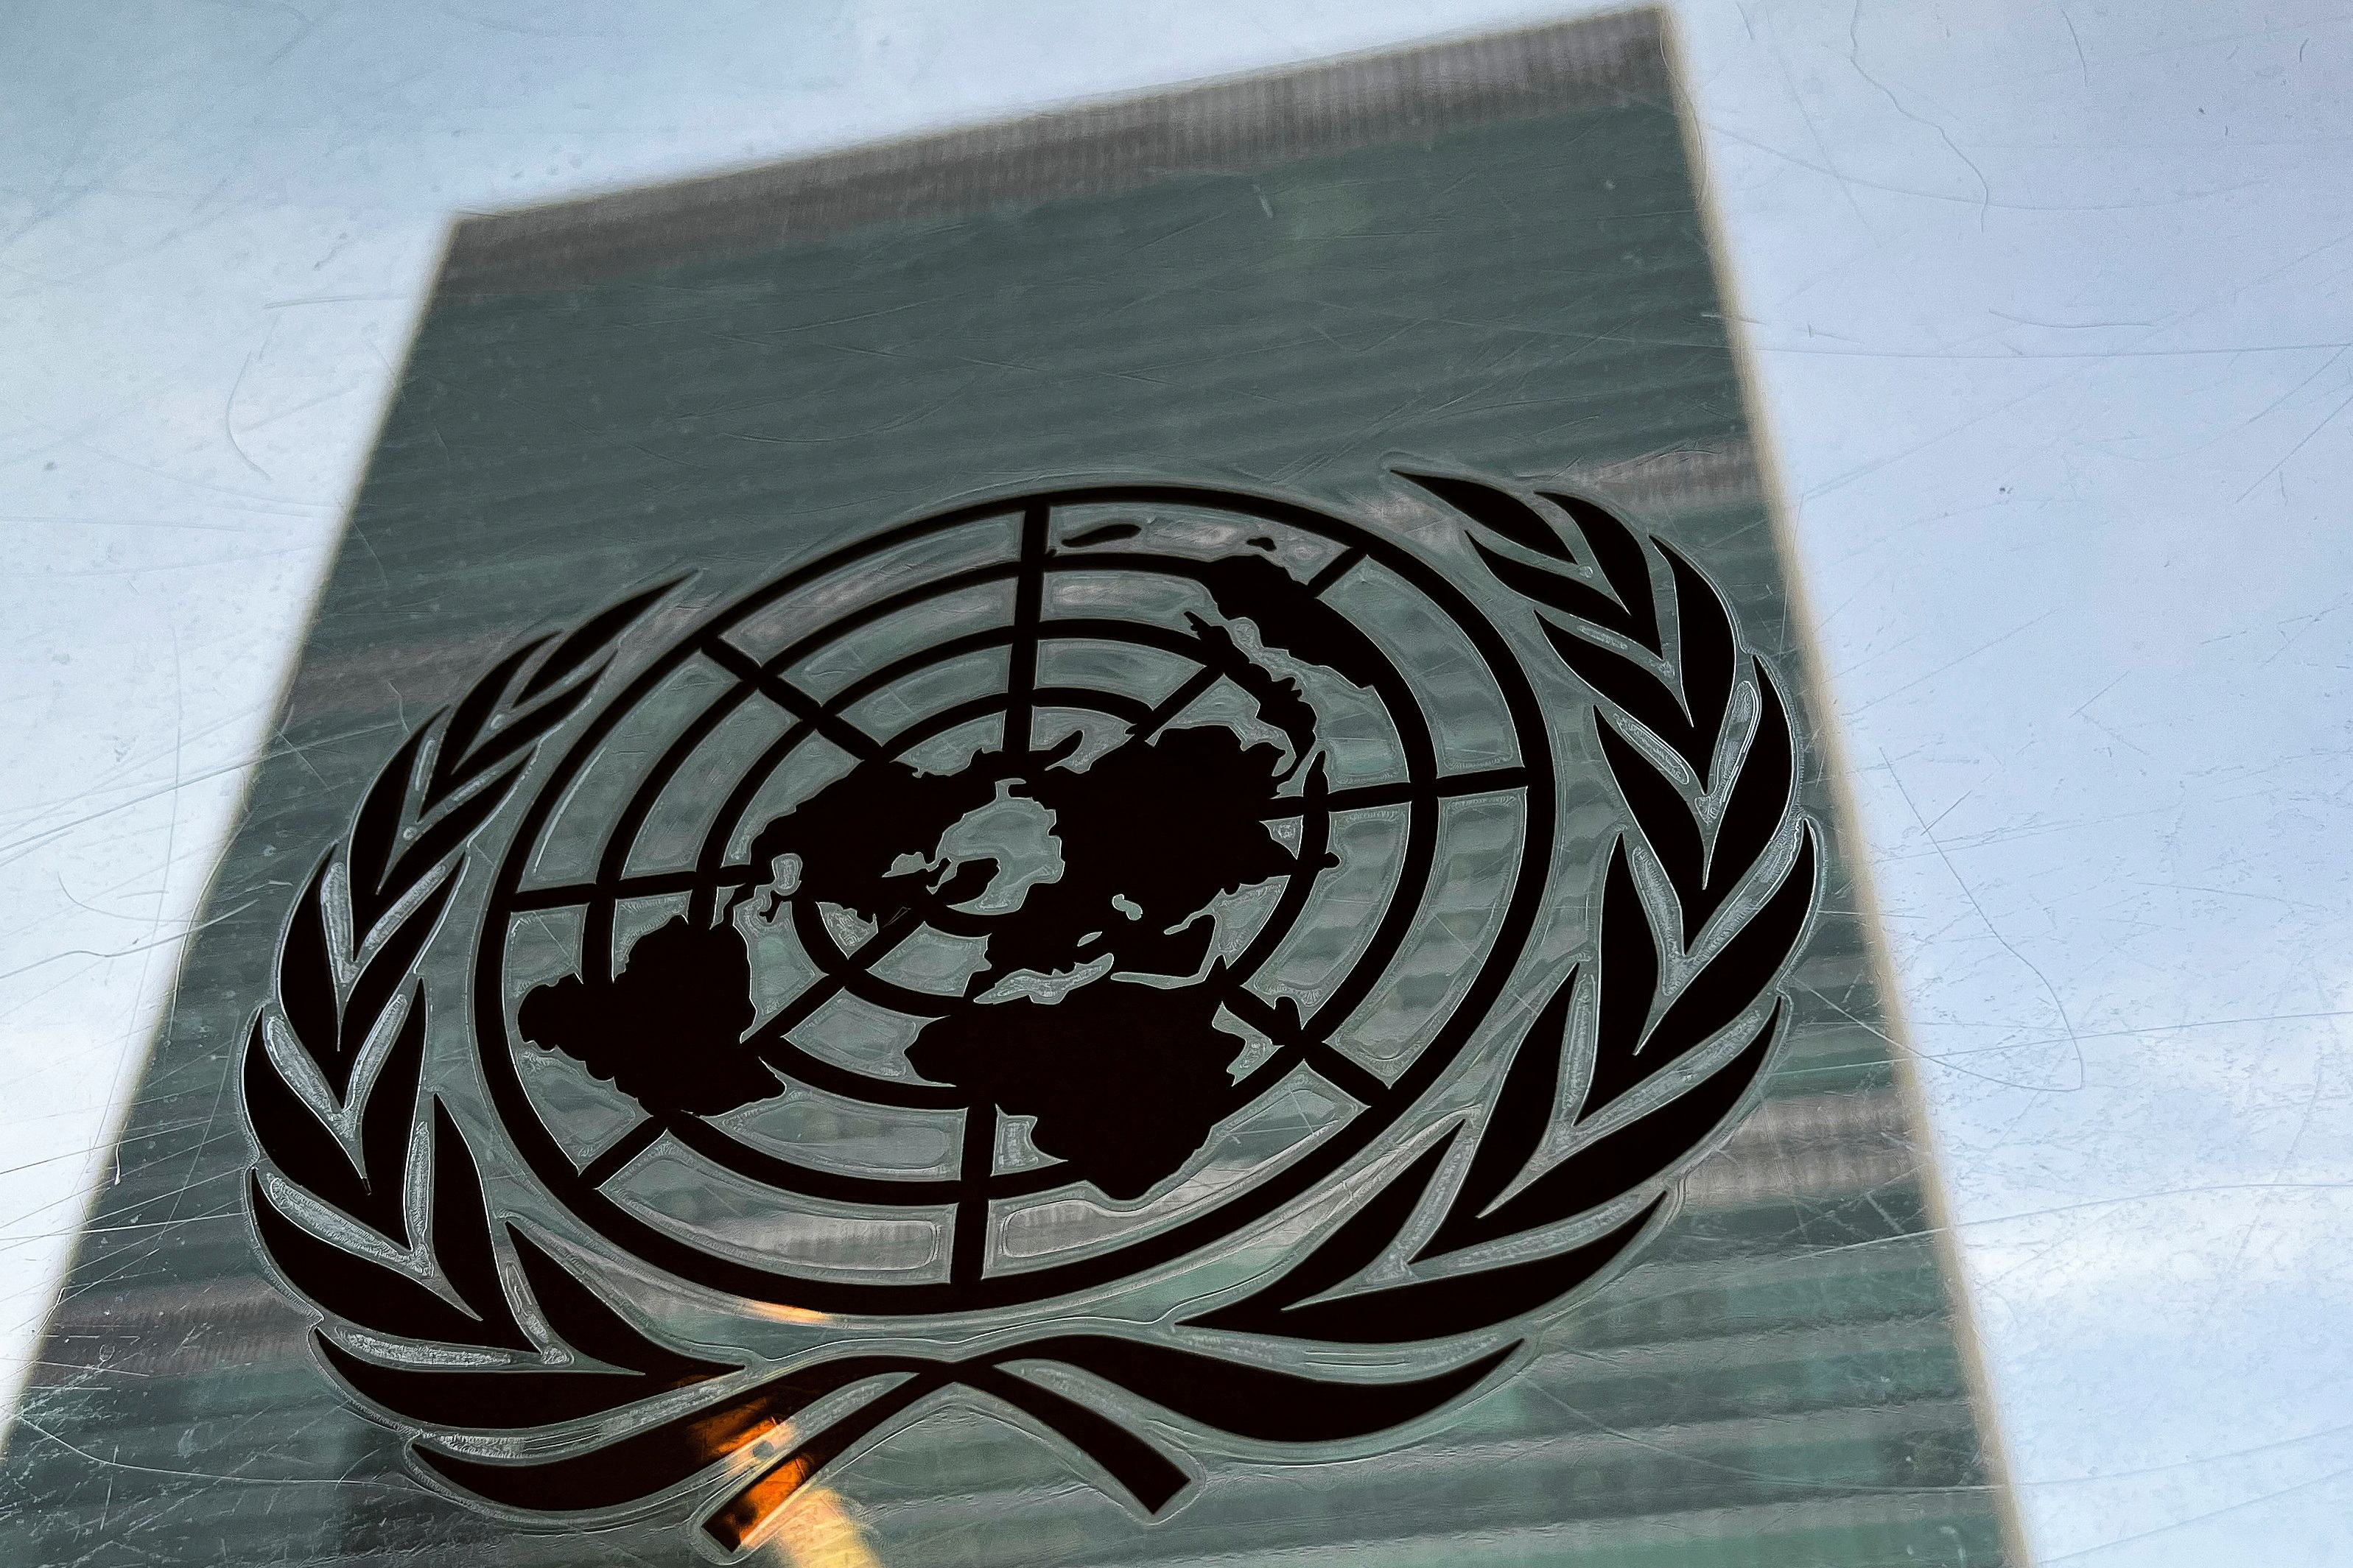 U.N. publicly rejects Russia’s call for secret vote on Ukraine